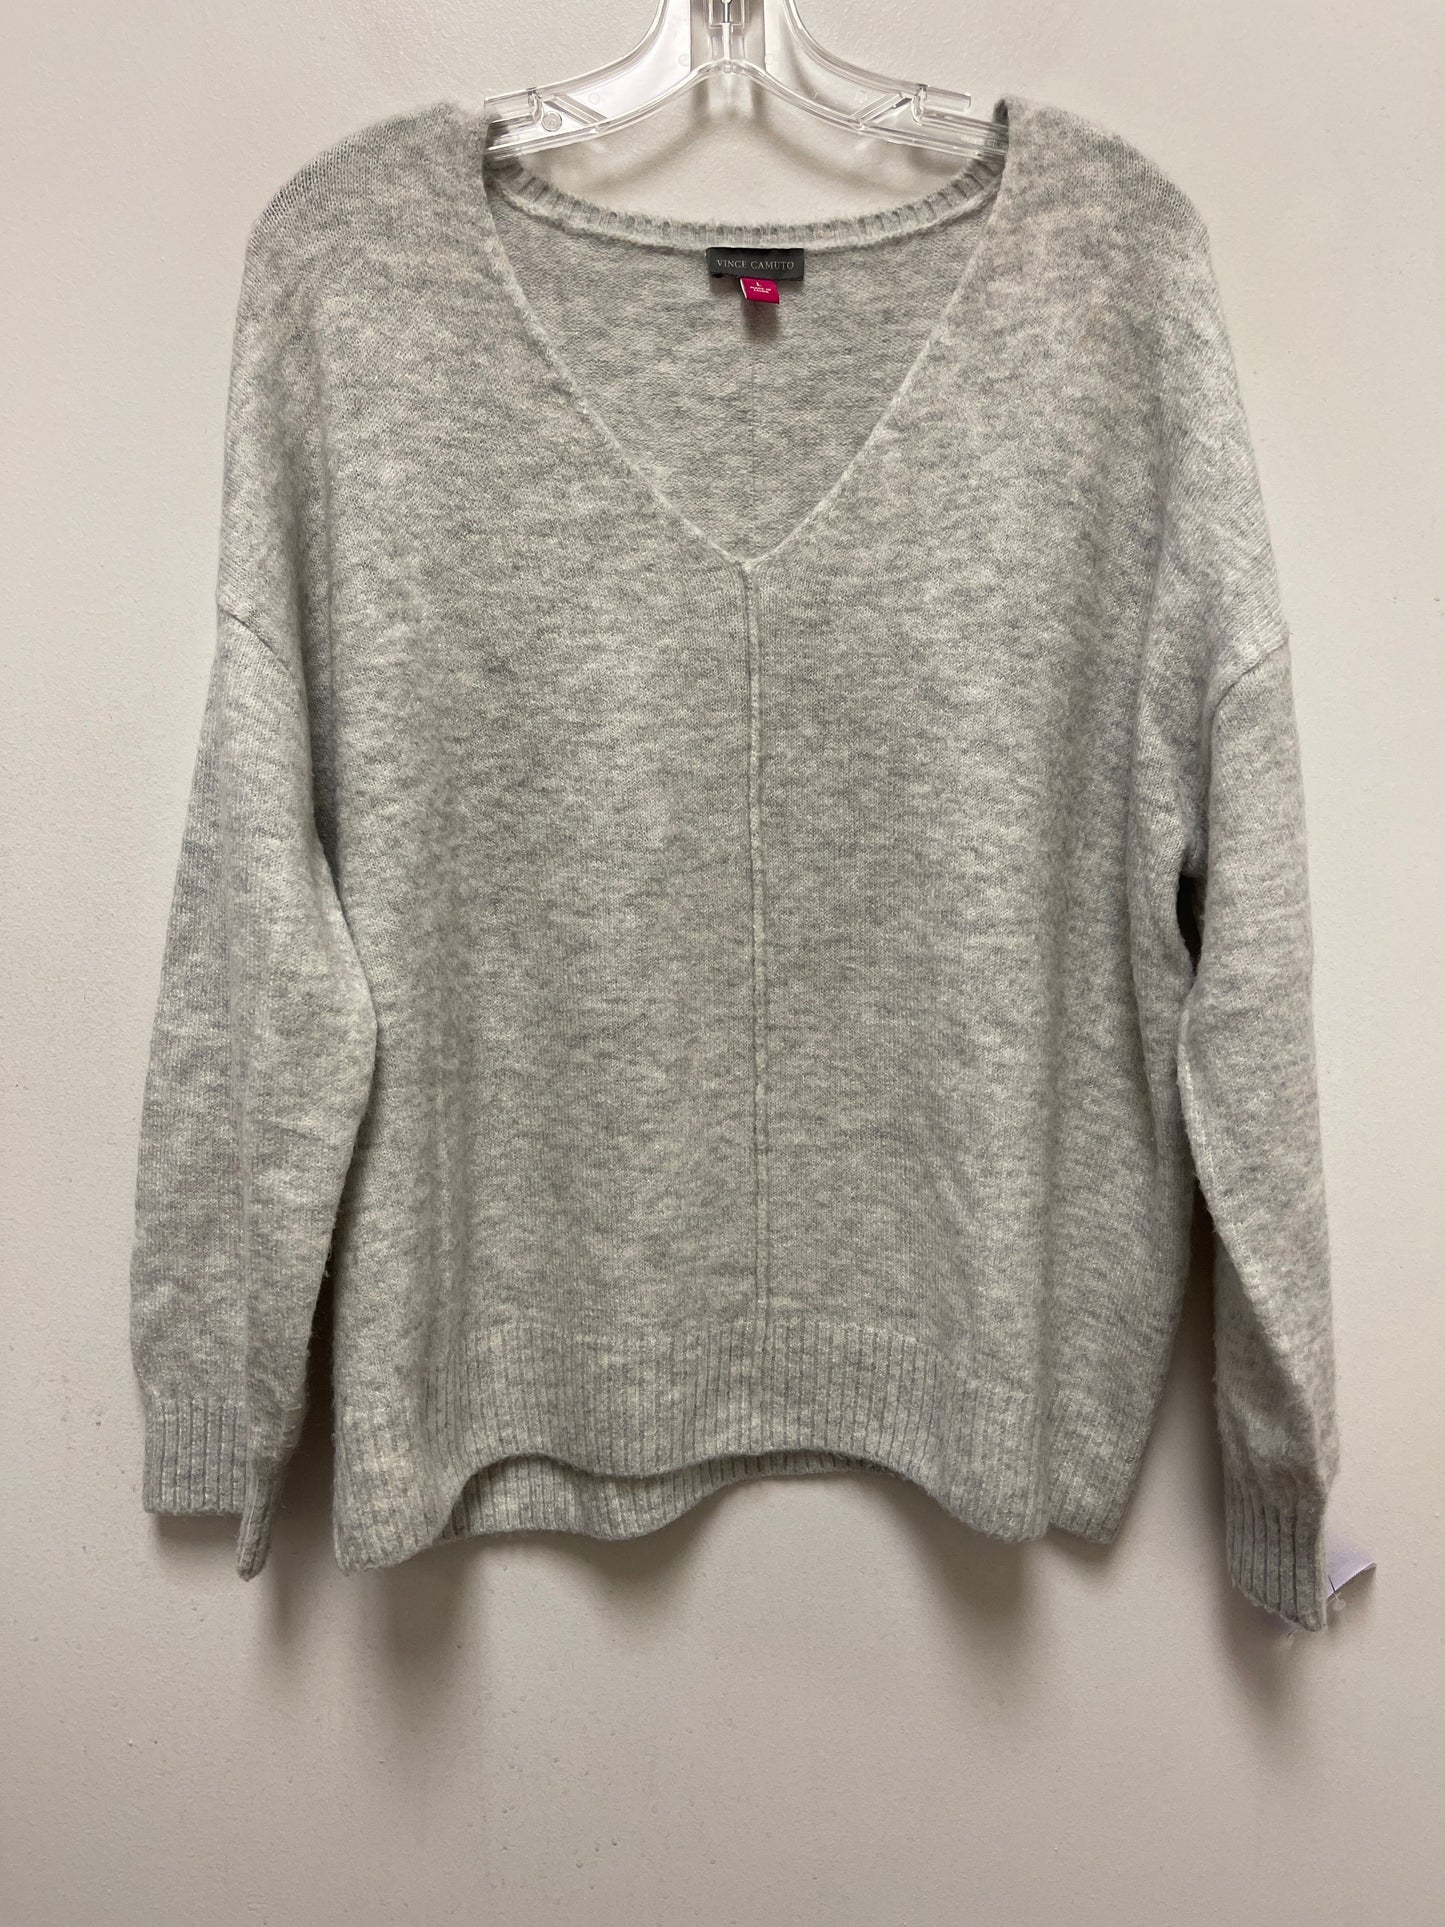 Grey Sweater Vince Camuto, Size L